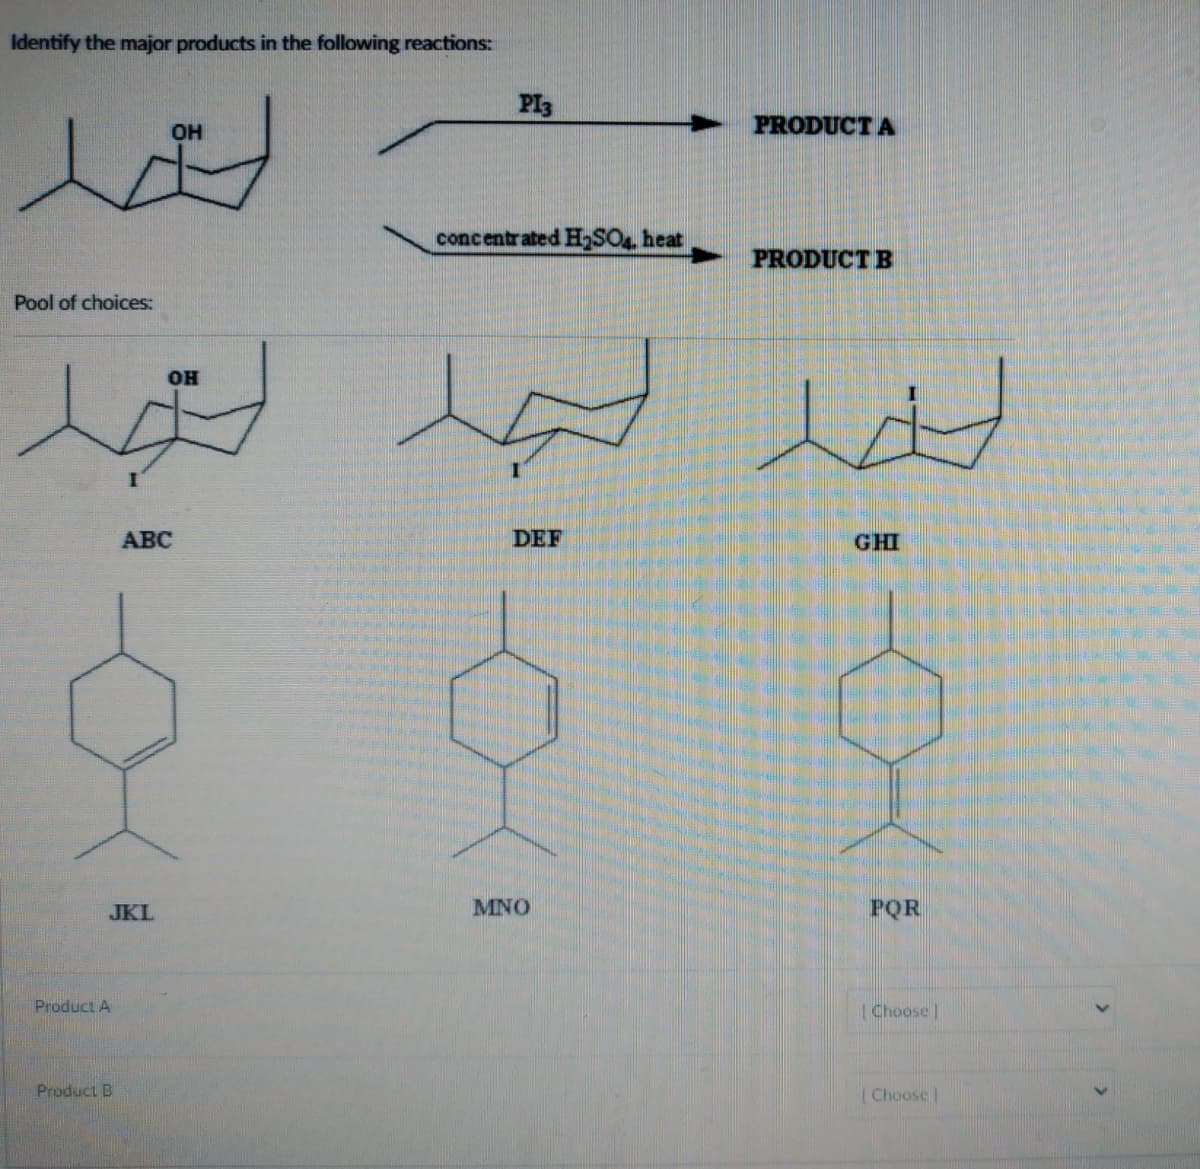 Identify the major products in the following reactions:
e
Pool of choices:
JKL
Product A
OH
Product B
OH
حمد جدید
ABC
PI3
concentrated H₂SO4. heat
DEF
PRODUCT A
MNO
PRODUCT B
GHI
POR
[Choose ]
Choose